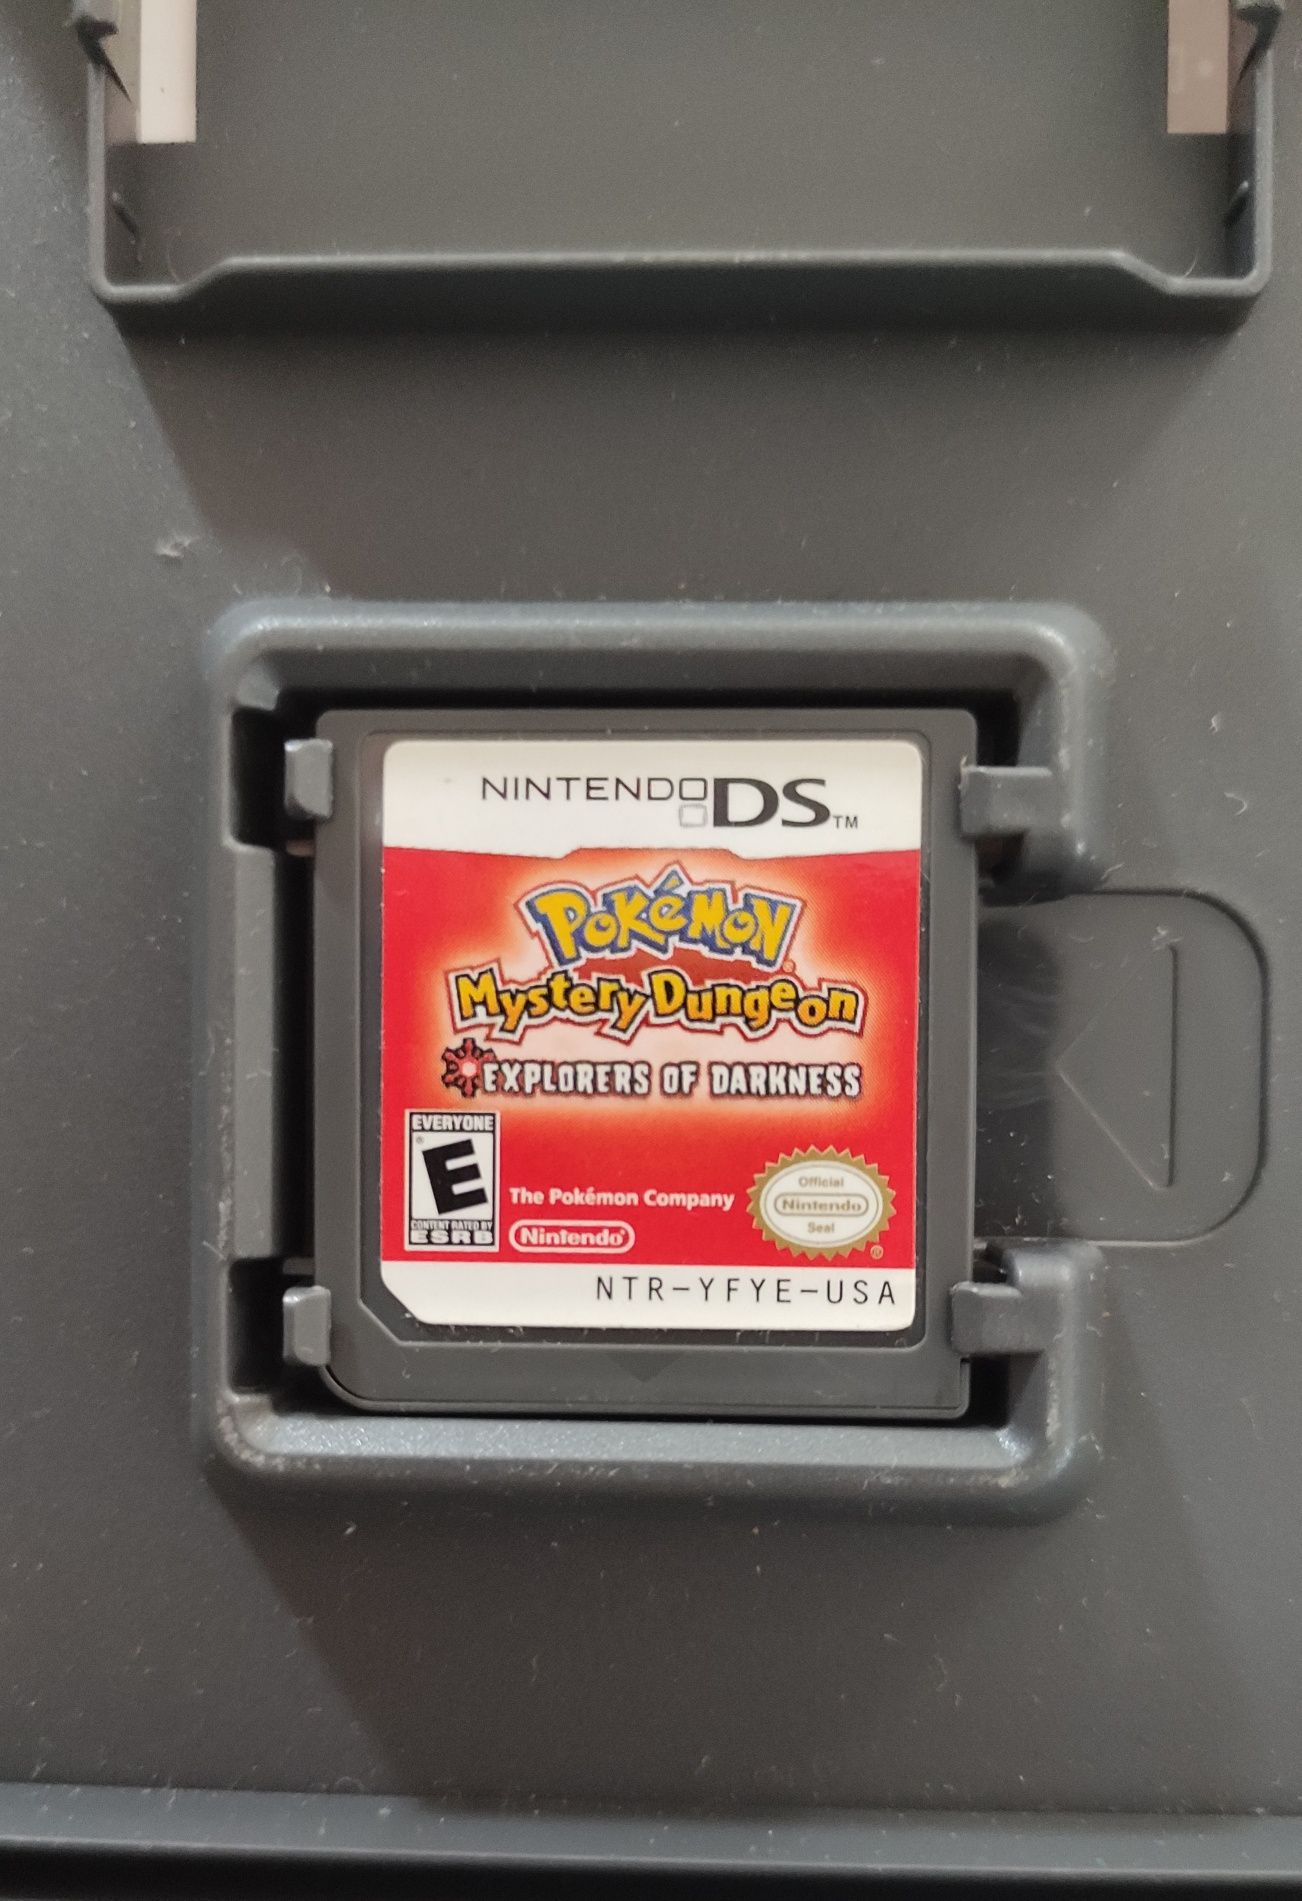 Nintendo DS | Pokémon Mystery Dungeon: Explorers of Darkness (Completo